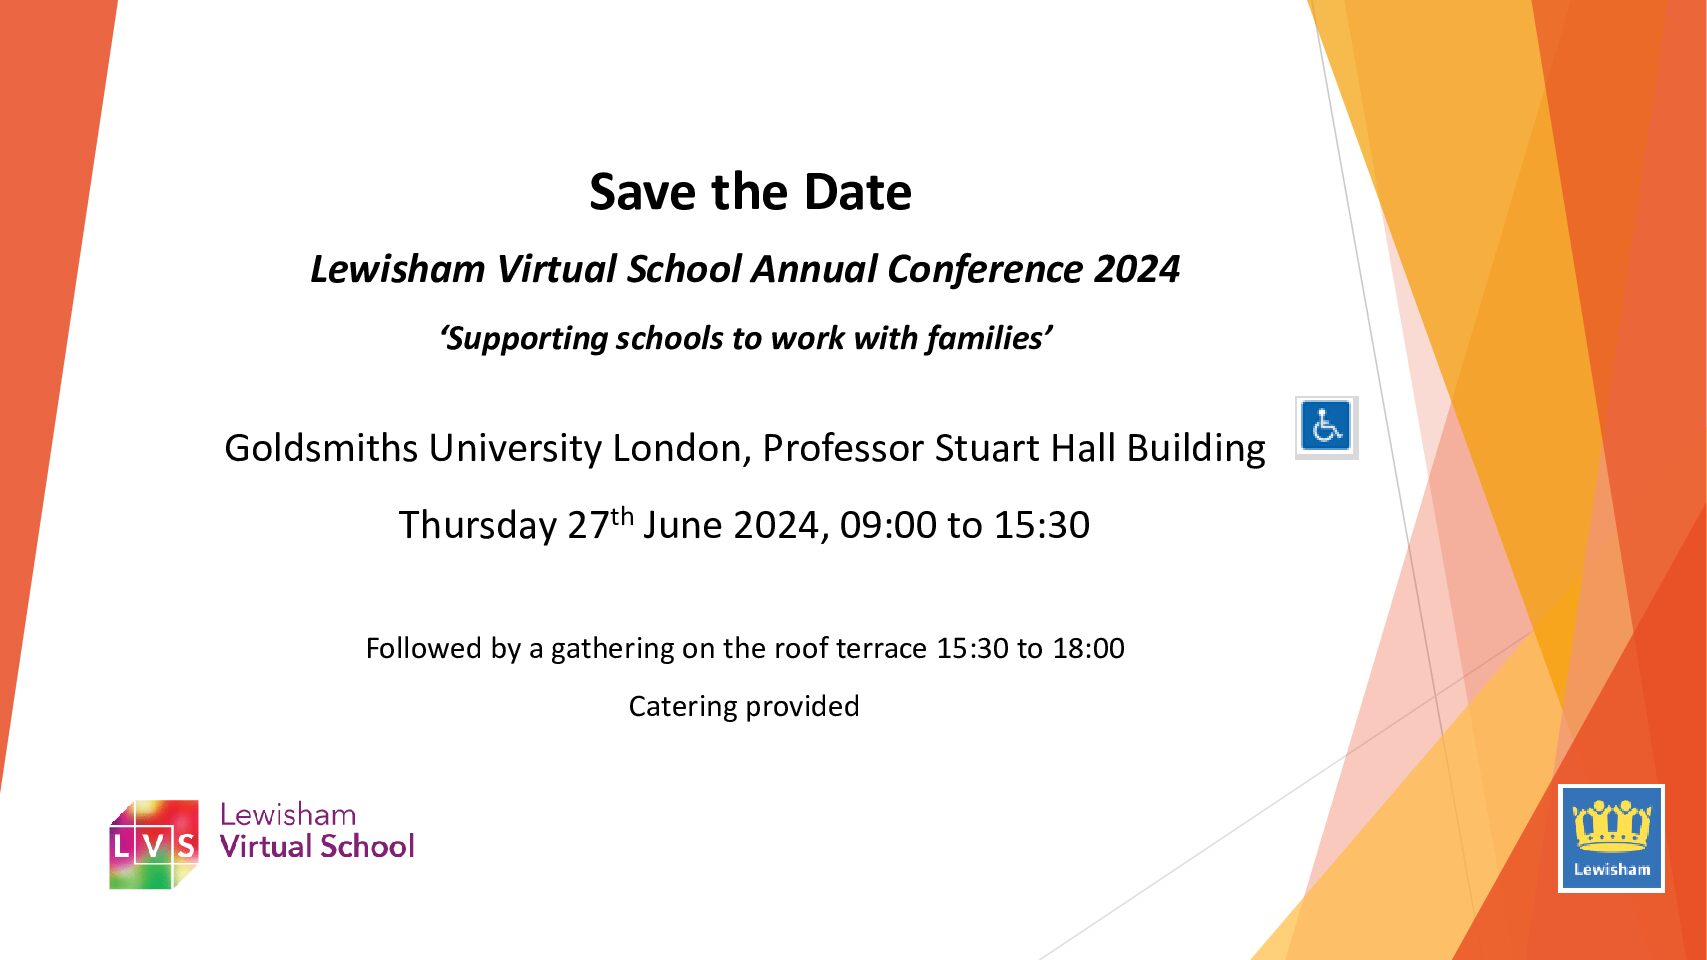 "Save the date" - Lewisham Virtual School Annual Conference 2024